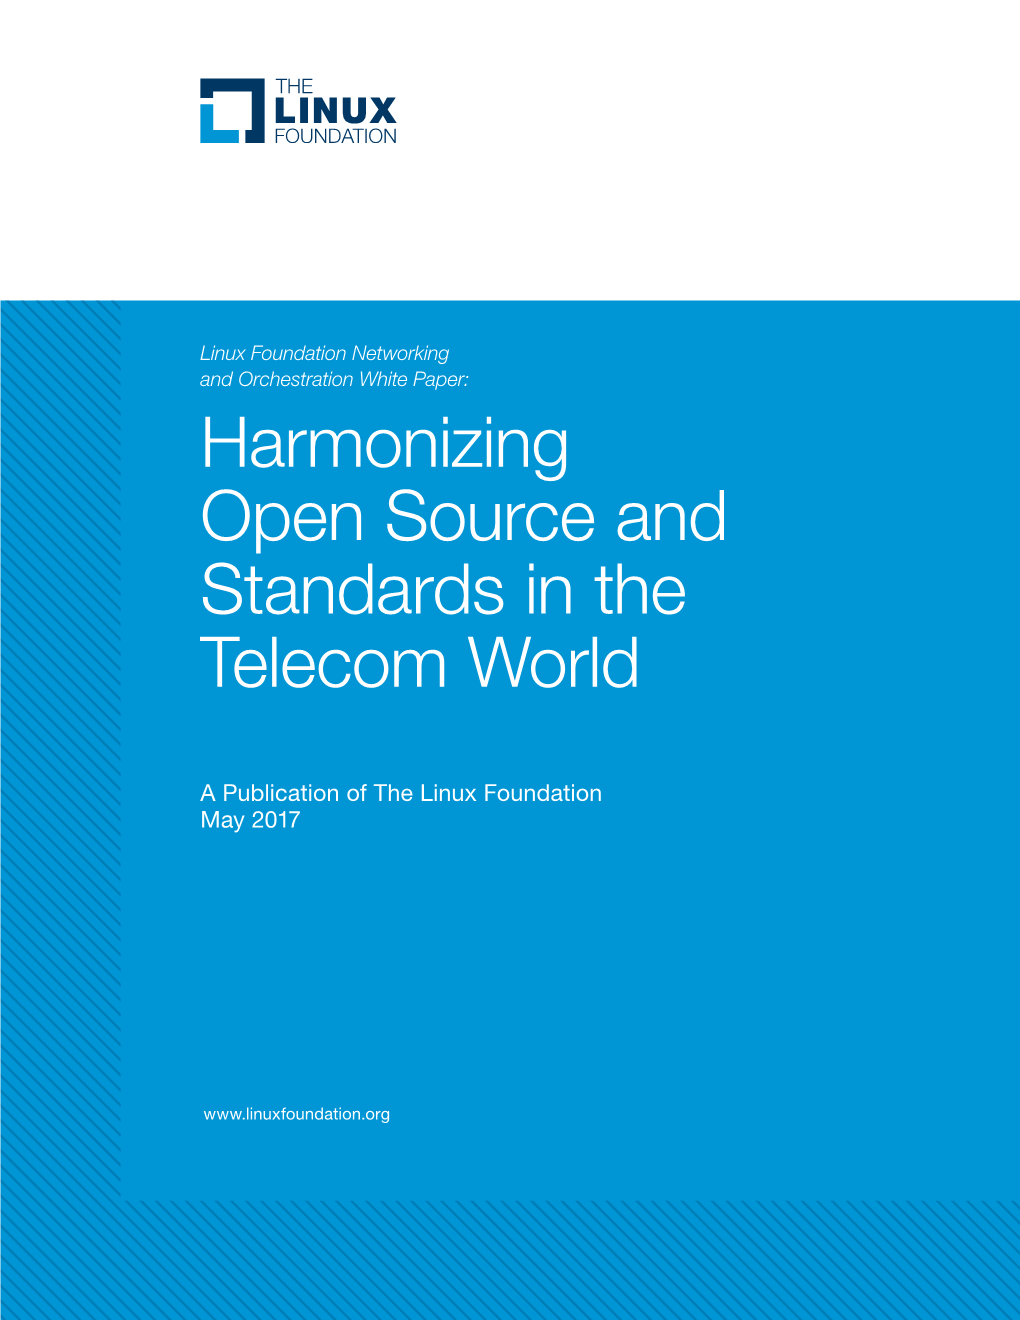 Harmonizing Open Source and Standards in the Telecom World